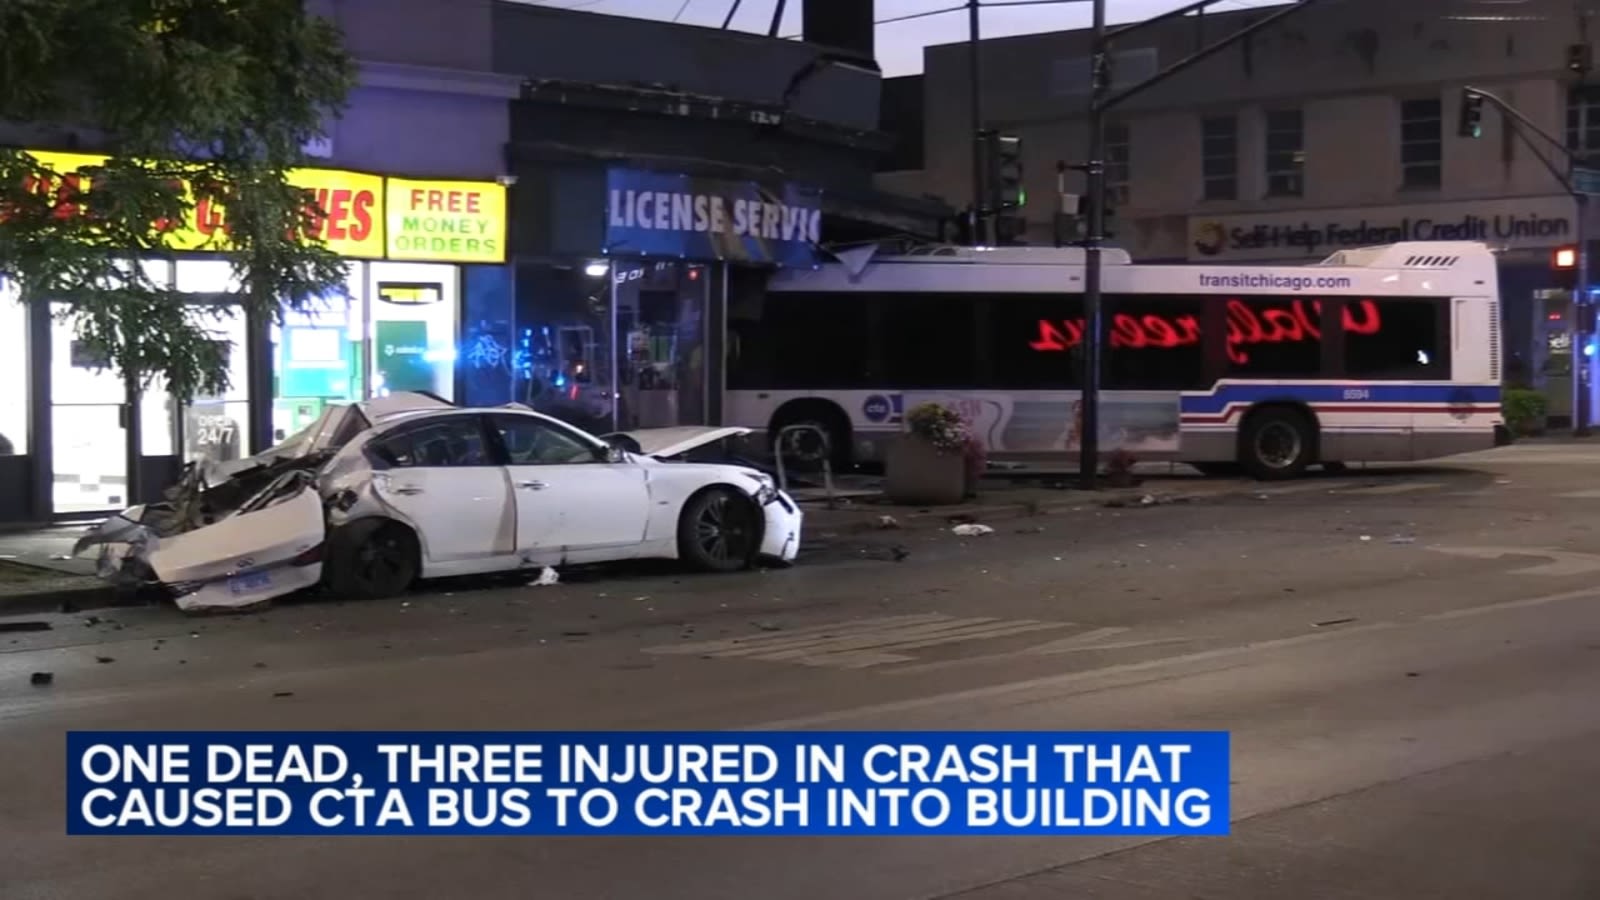 CTA bus crashes into building after sedan runs red light; 1 killed, 3 hurt, Chicago police say